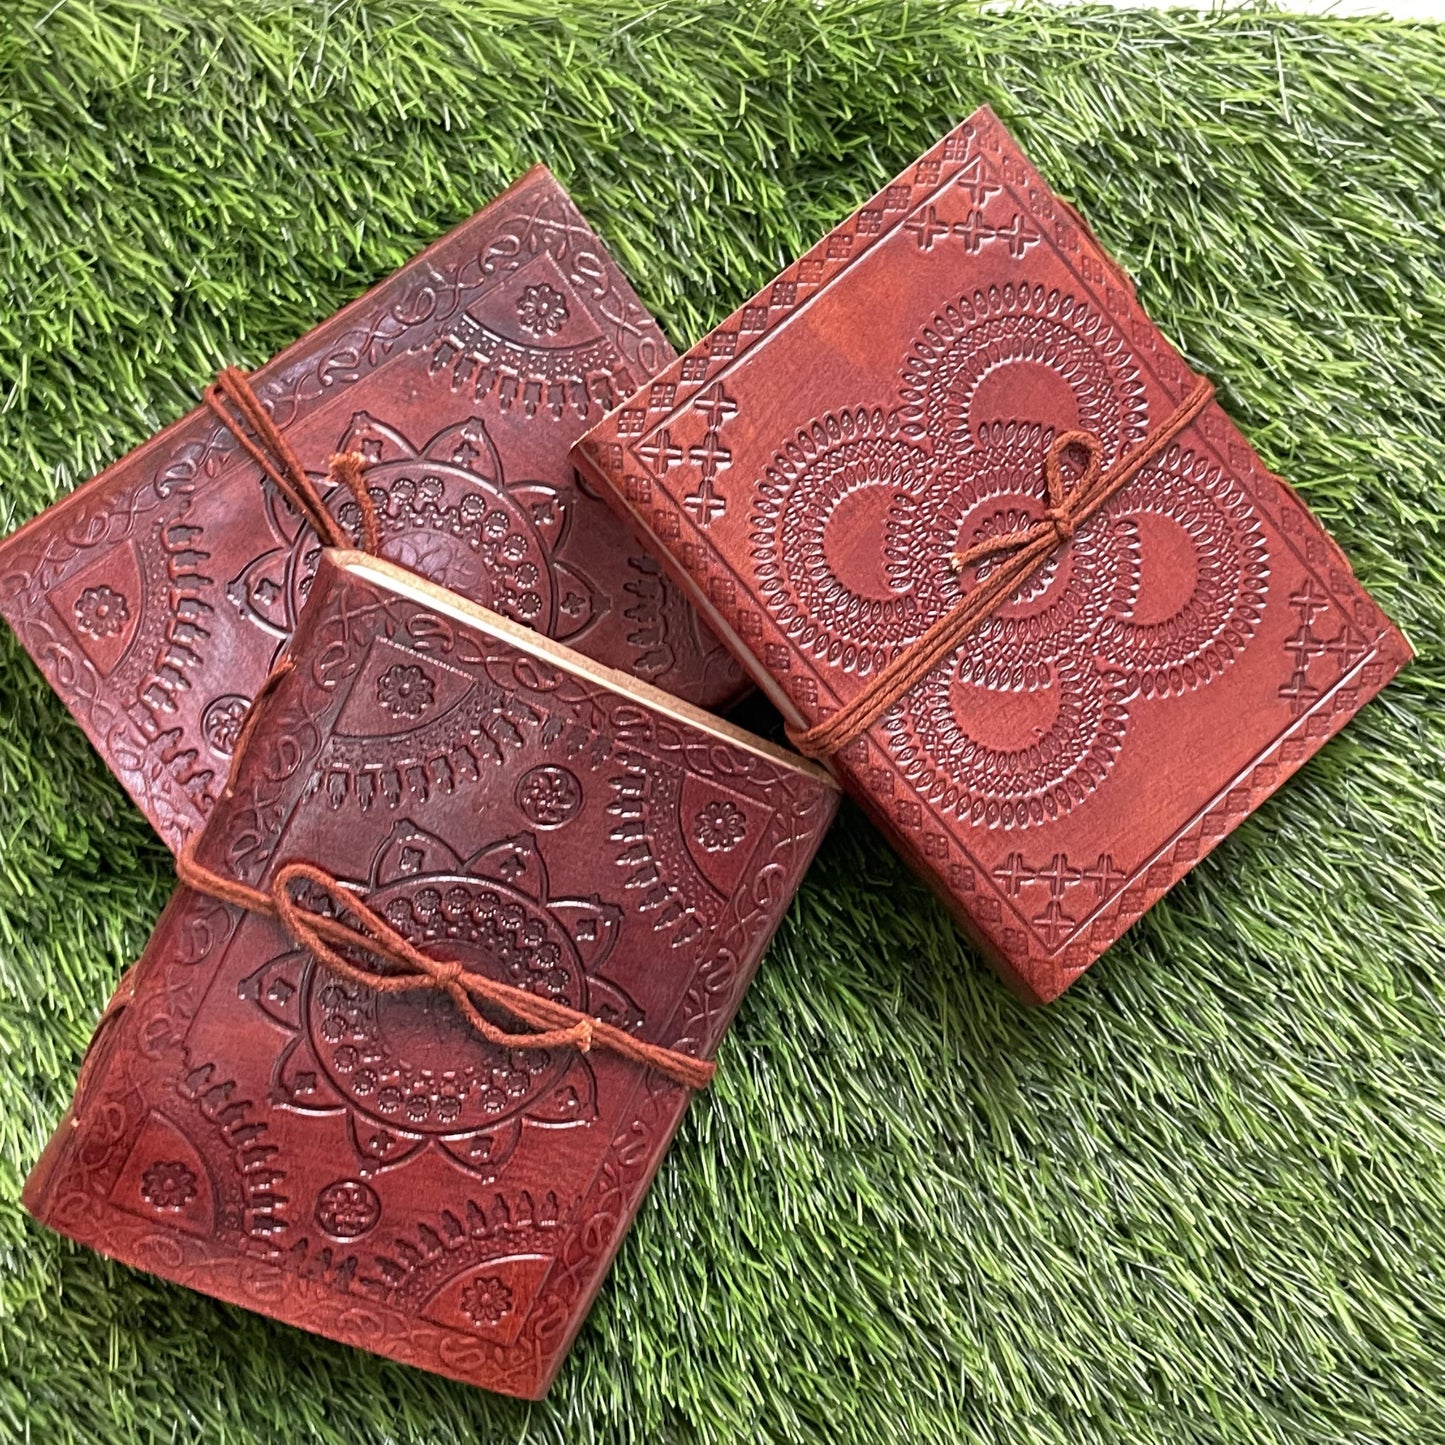 Embellished Leather Diary in a Compact 6x4.5 Inch Size" With Natural Gemstone